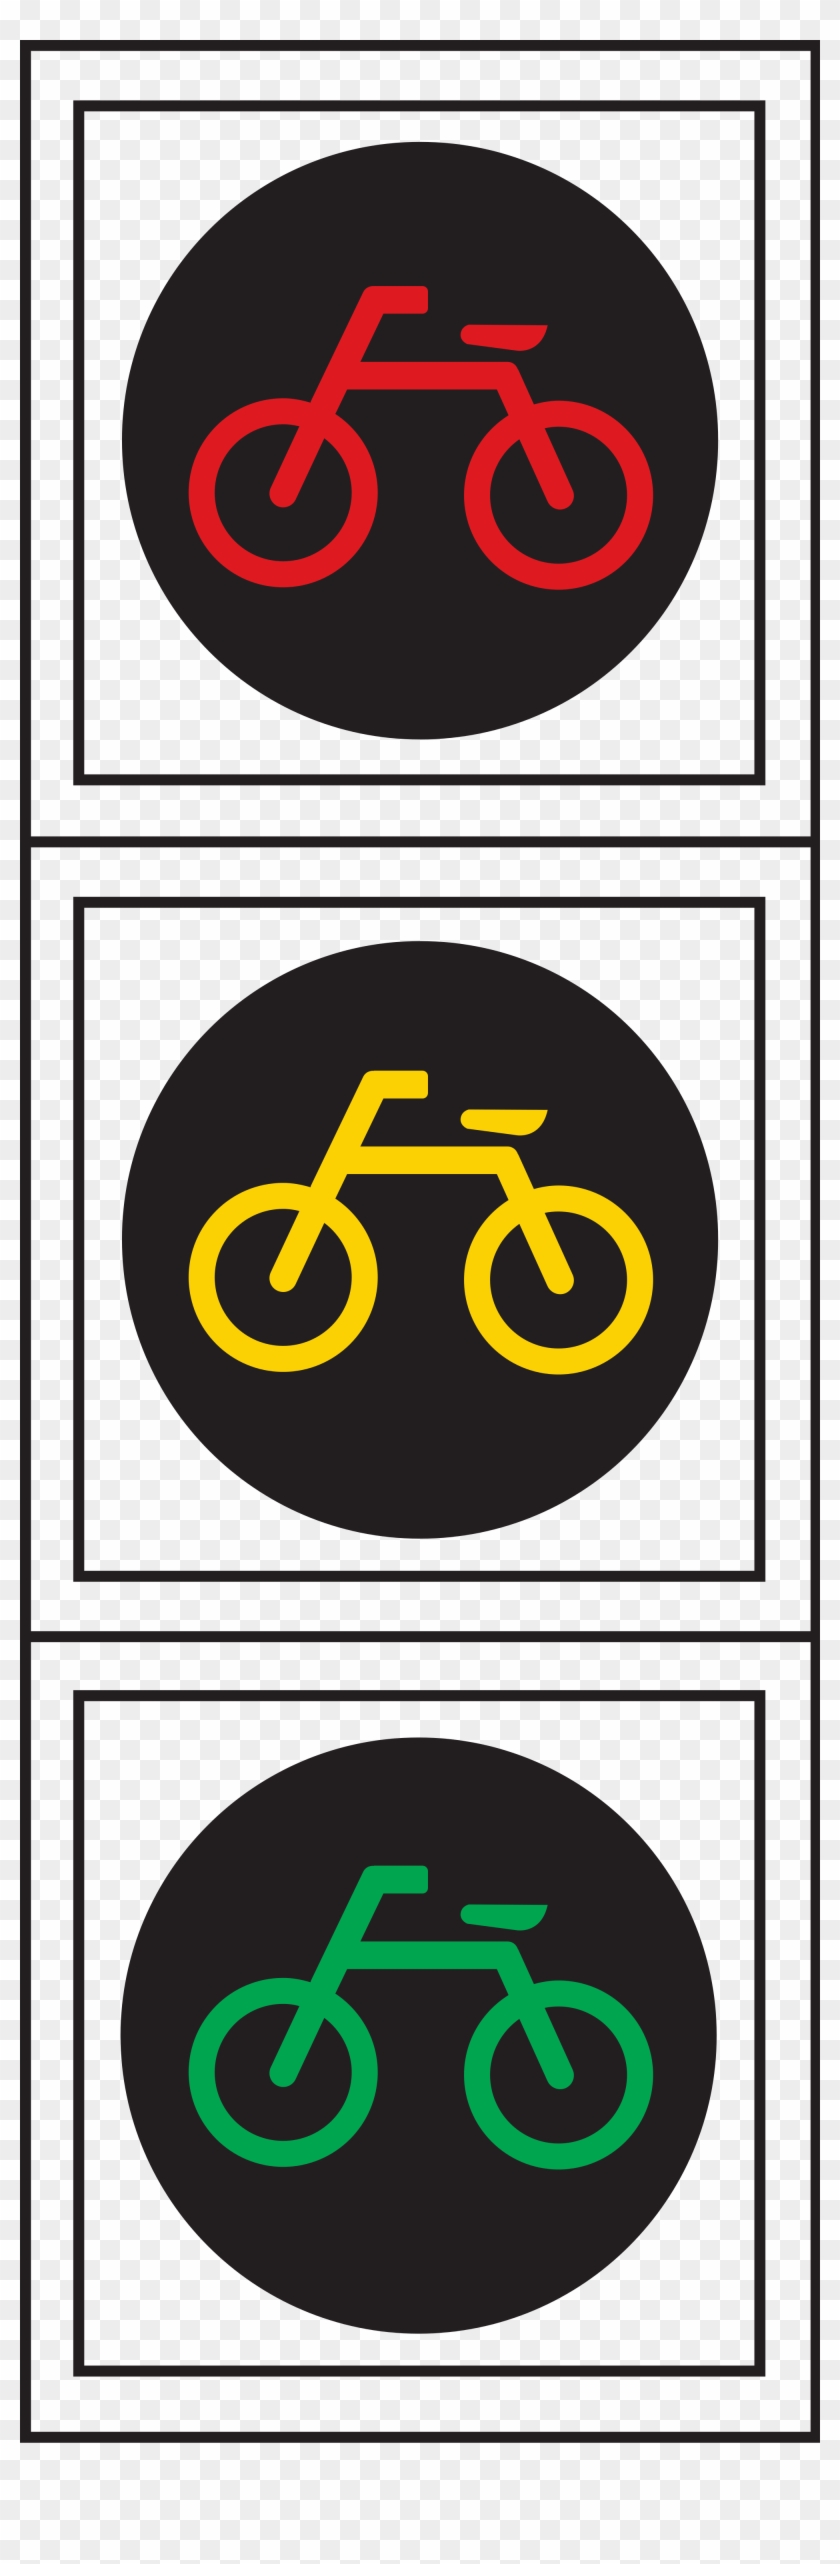 Open - Traffic Lights For Bicycle #935408